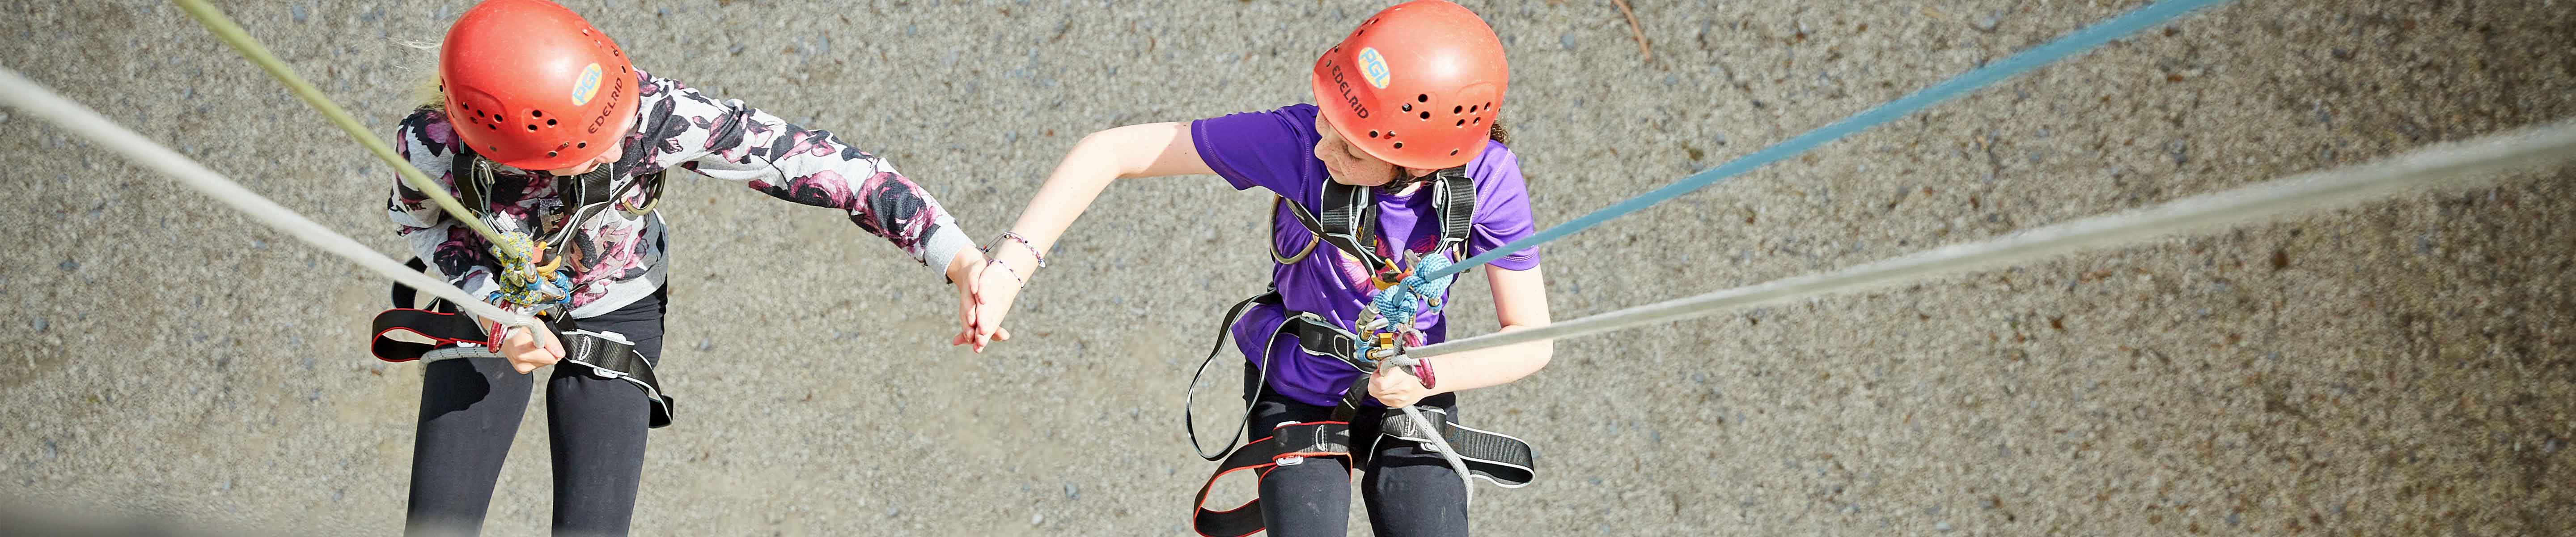 Two girls on an abseil wall giving each other a high five